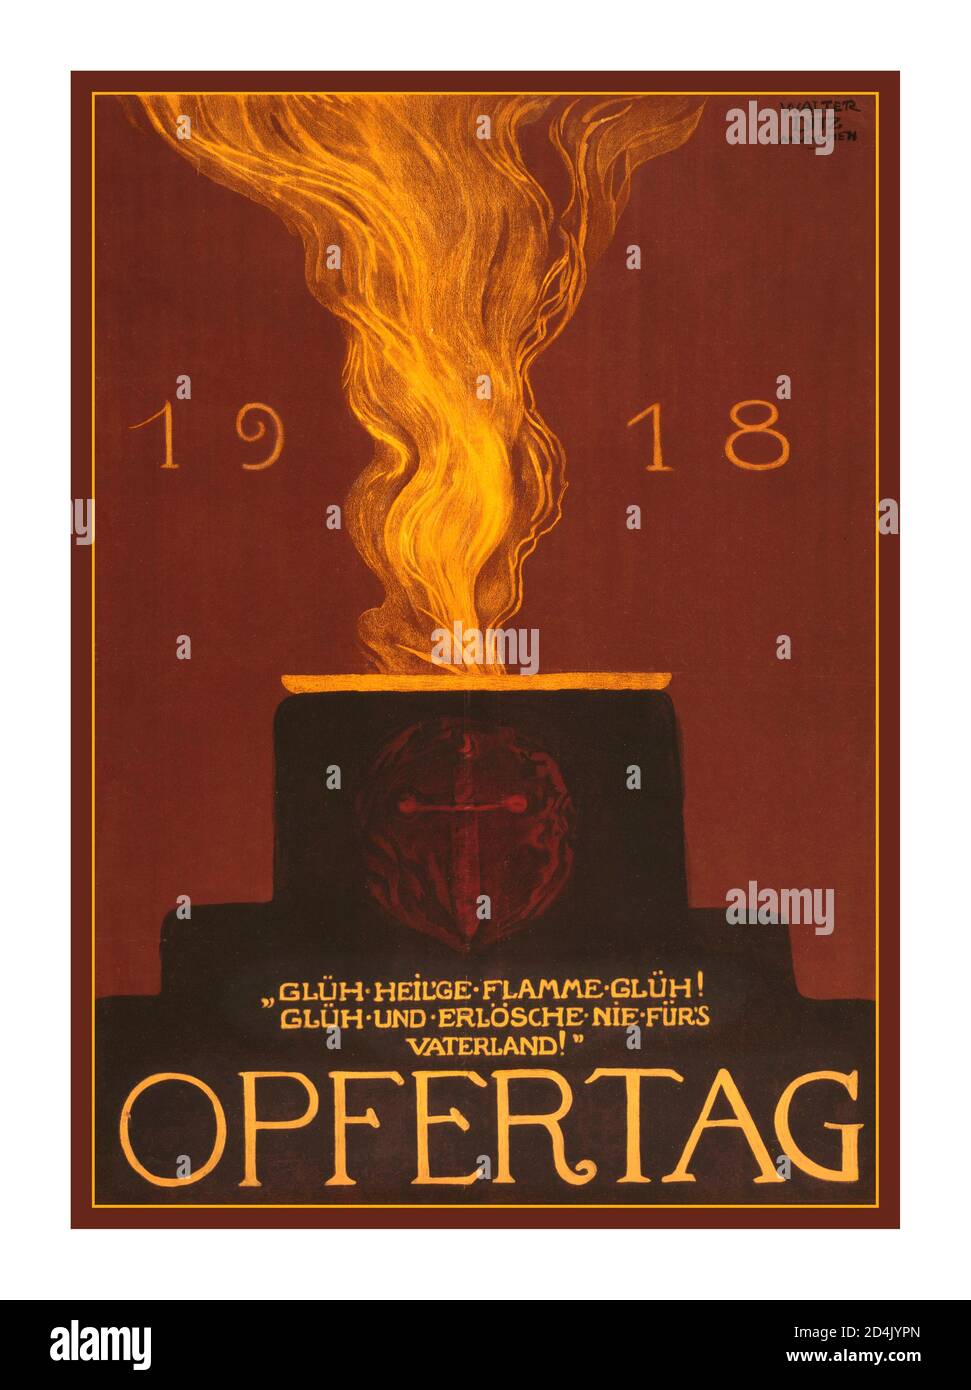 WW1 1918  'SACRIFICE DAY' World War One German Propaganda Poster ‘Glow holy flame glow! Glow and never go out, for the Fatherland!' Germany, 1918 PROPAGANDA WAR WWI SACRED FLAME FATHERLAND GERMANY First World War Stock Photo